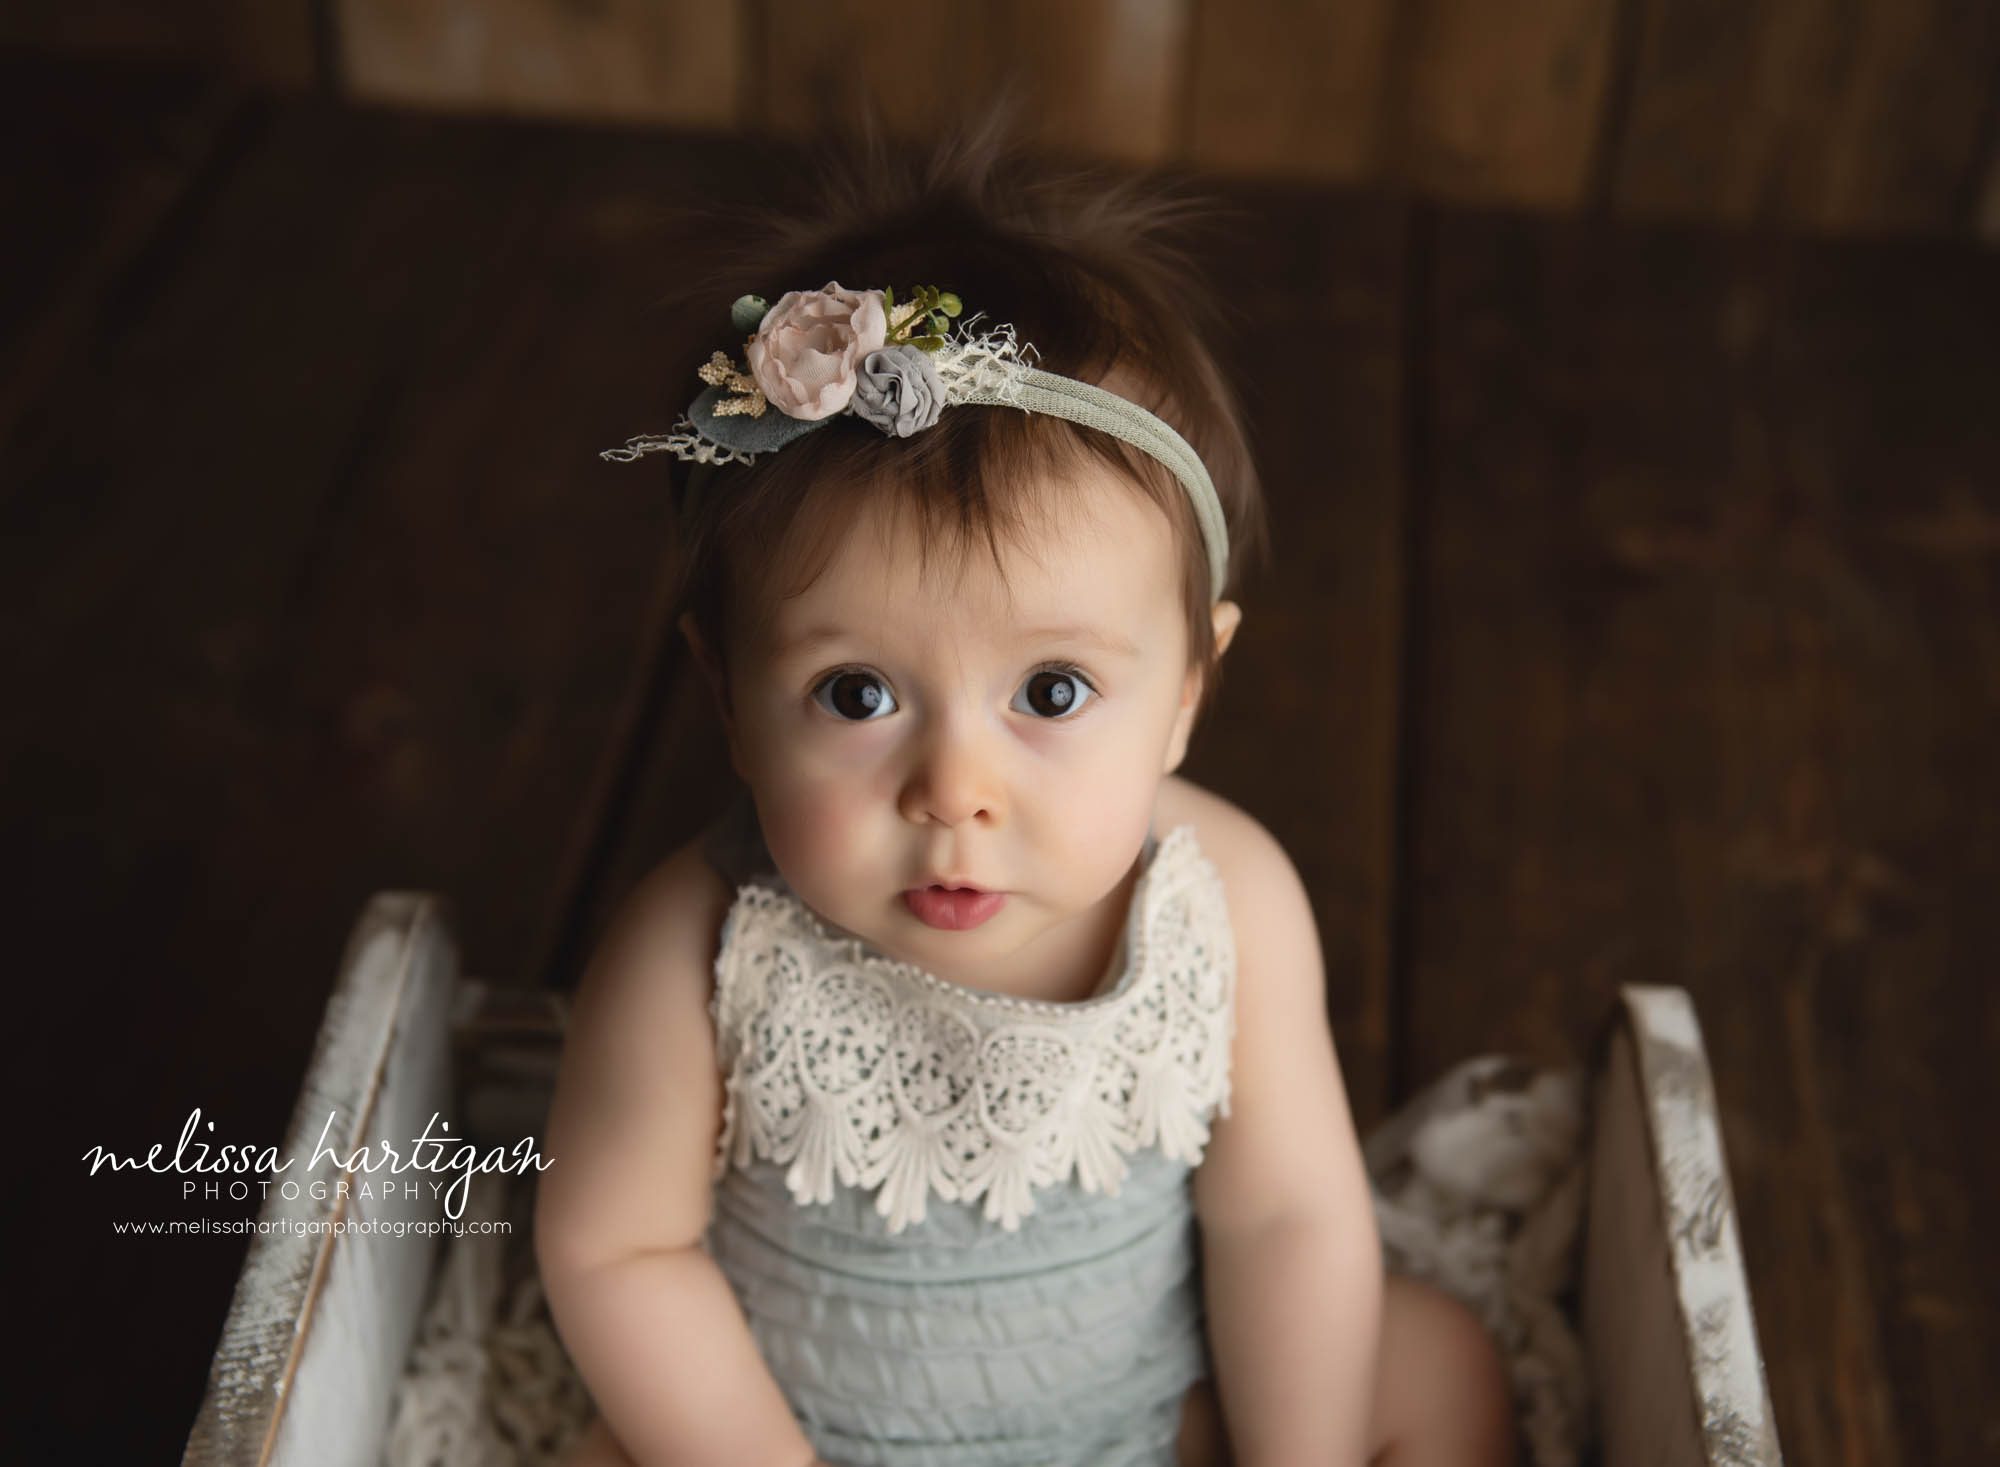 Baby girl sitting in wooden prop with blue romper with lace trim and floral headband